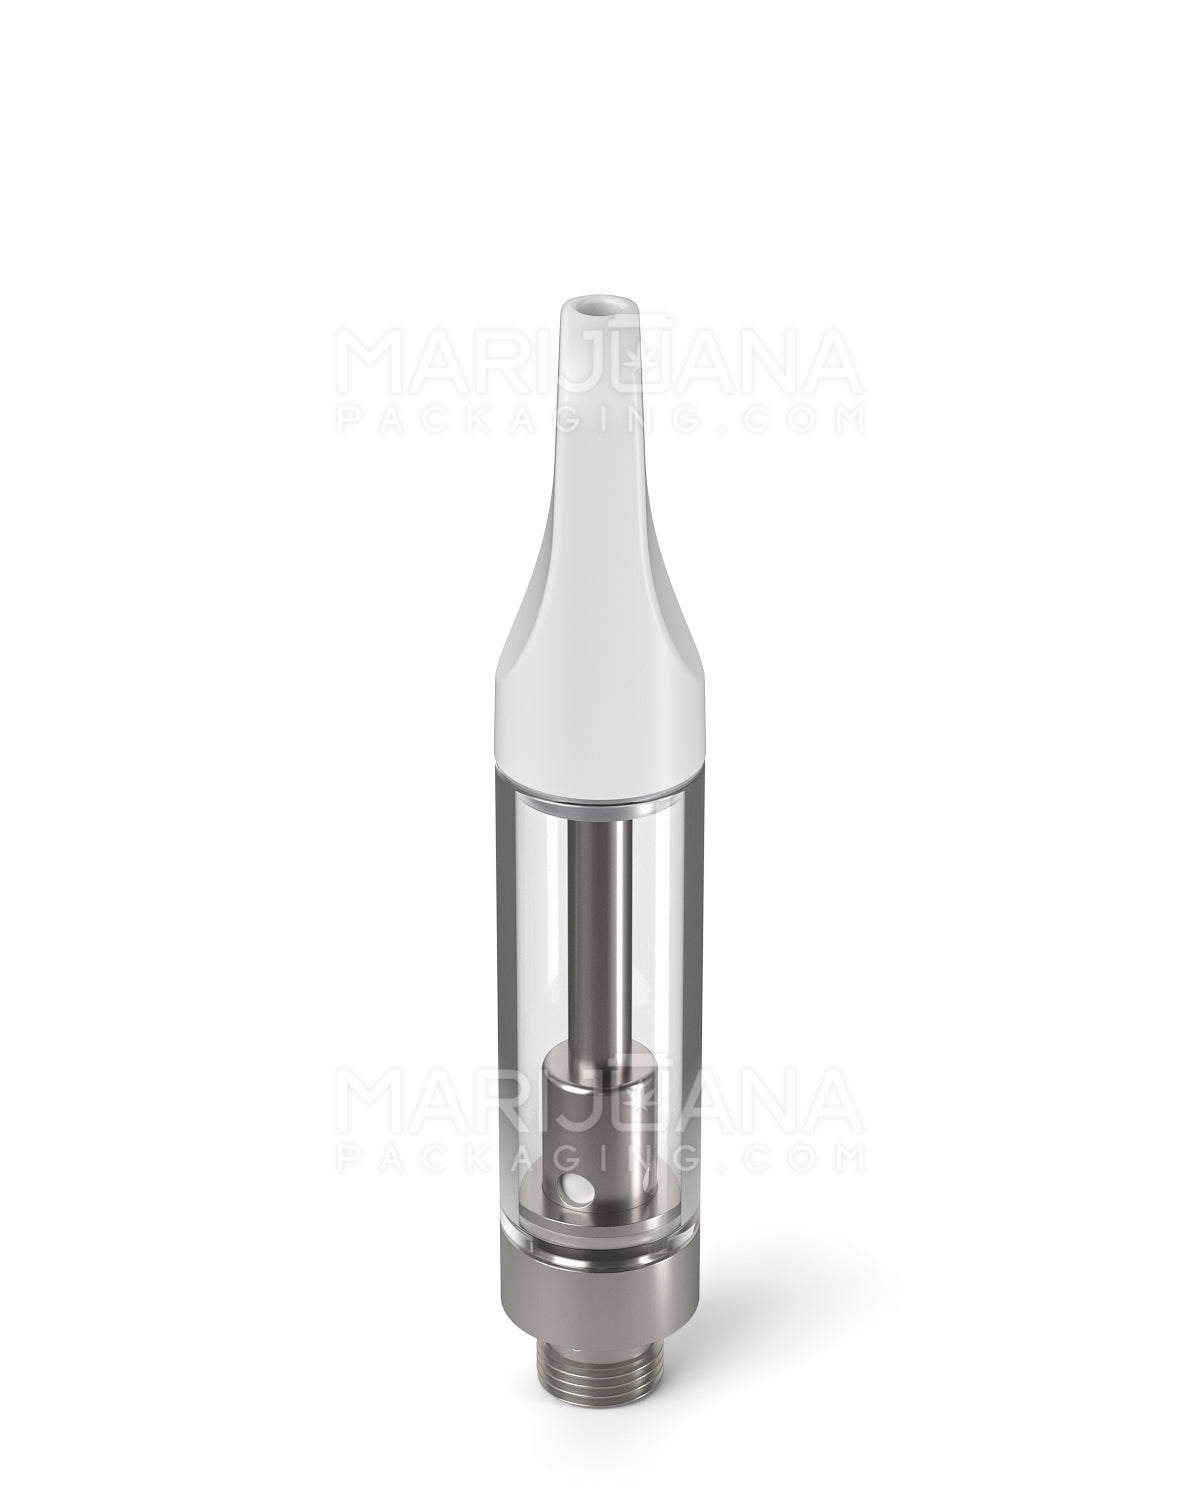 CCELL | Liquid6 Reactor Glass Vape Cartridge with White Plastic Mouthpiece | 1mL - Screw On - 100 Count - 4